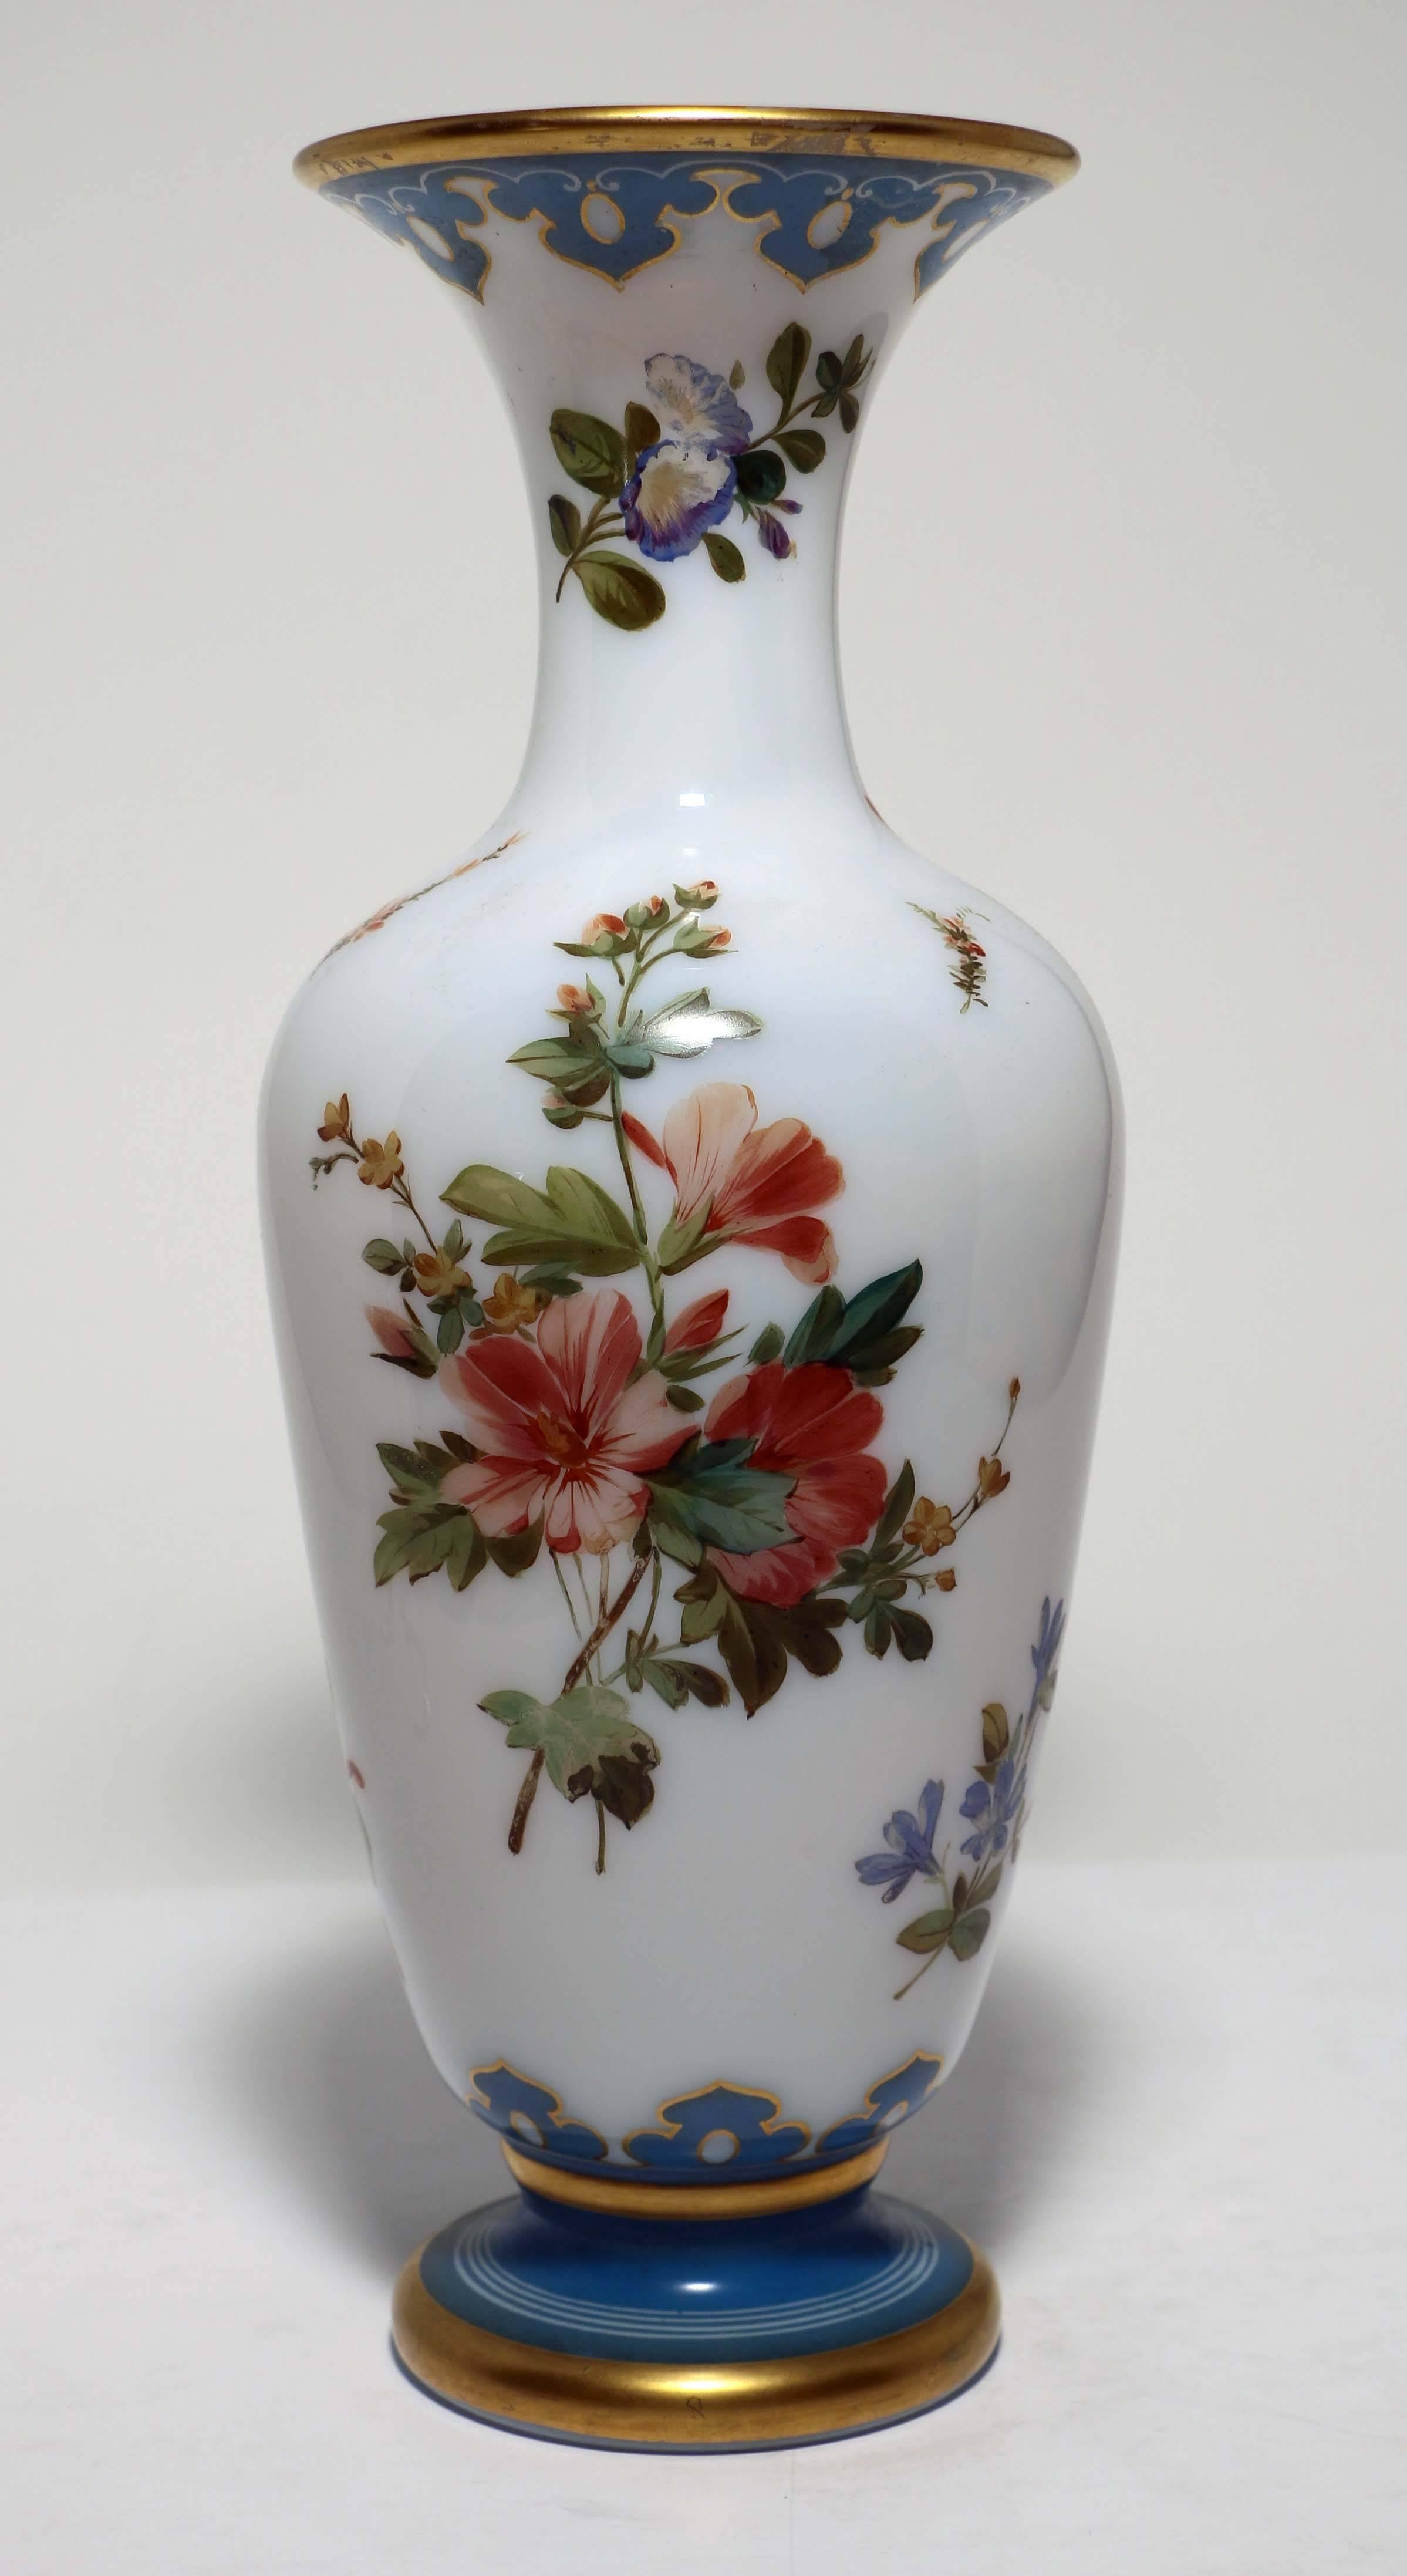 This French opaline vase we feel confident is Baccarat. It has an elegant slender baluster shape with blue decorated and gilt rim and foot. It compares very favorably in quality to others known to be by that famous factory. The painting of flowers